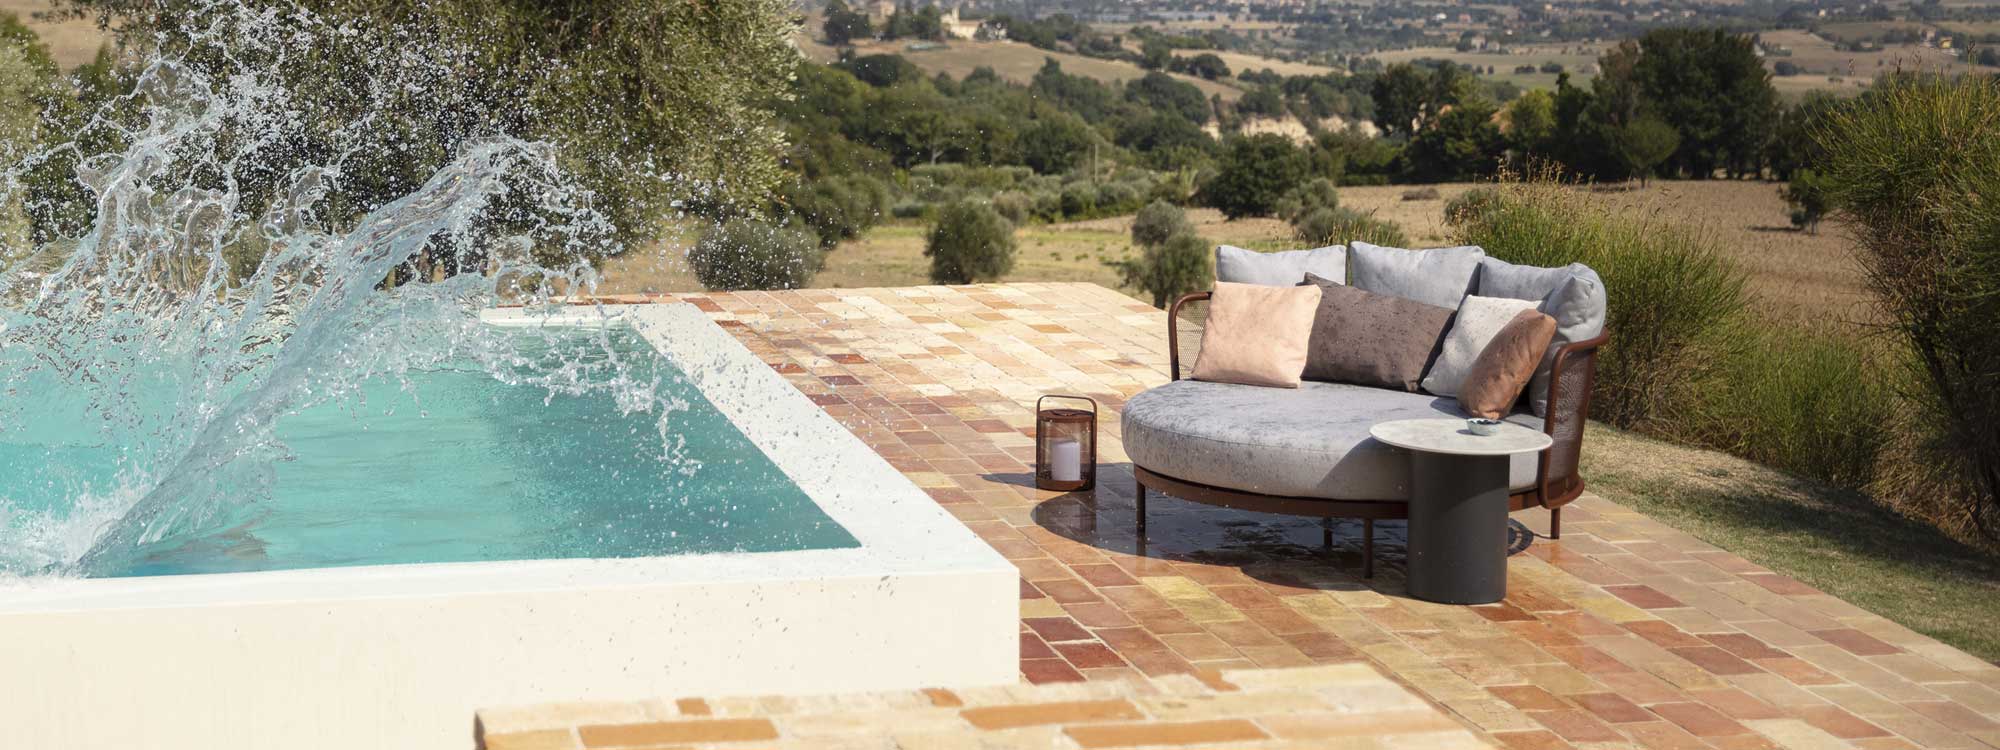 Image of splashes from swimming pool wetting the Baza minimalist garden daybed, with Portuguese countryside in background